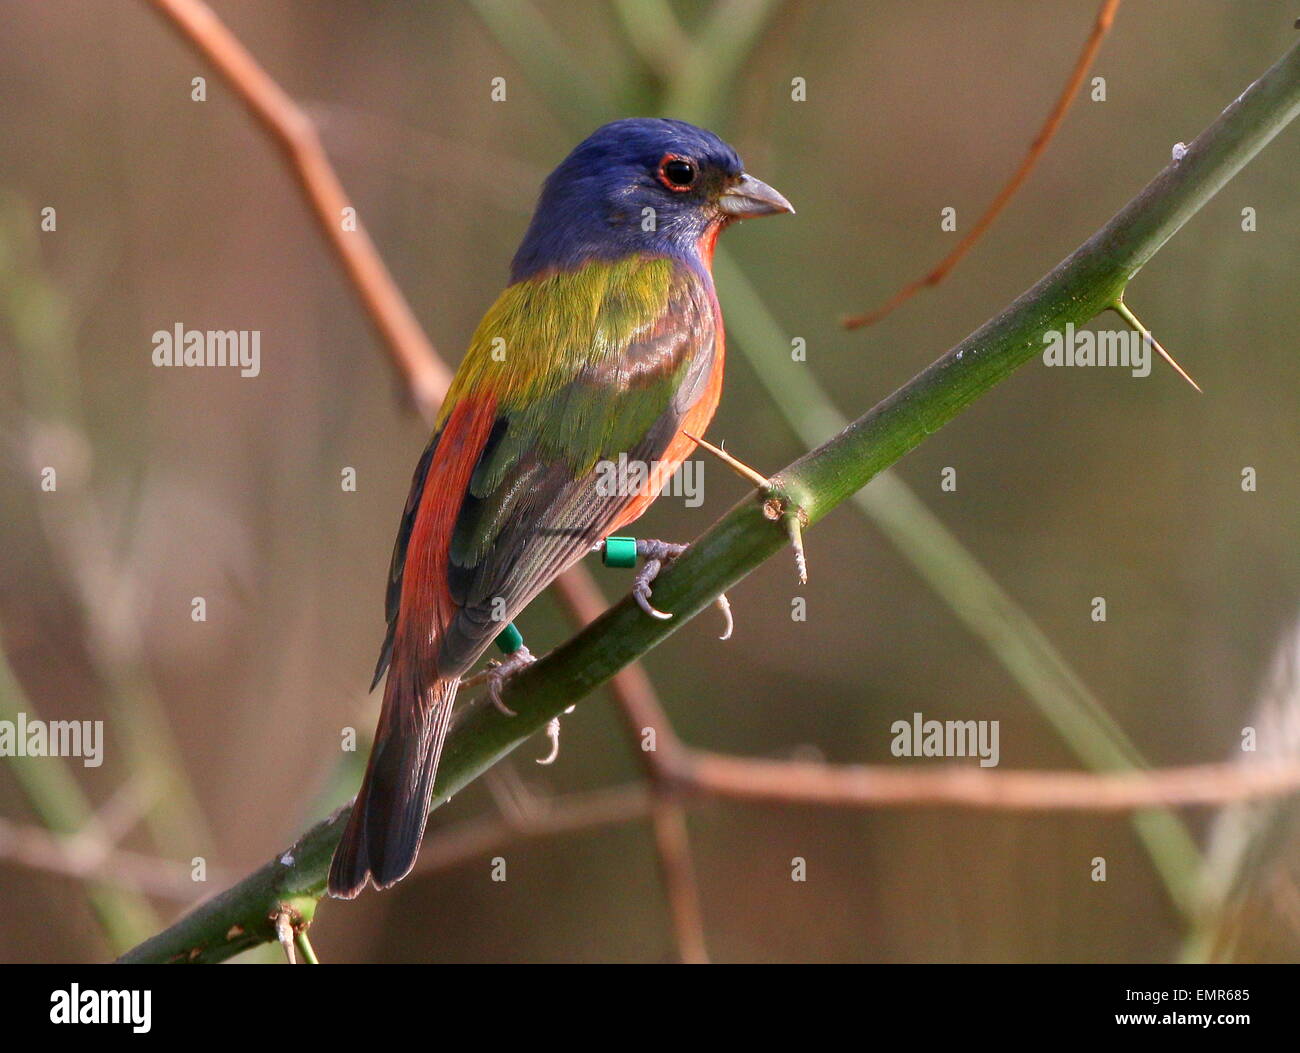 Close-up of a male  Painted bunting (Passerina ciris), native to the deserts of Mexico and the Southern USA (captive bird) Stock Photo